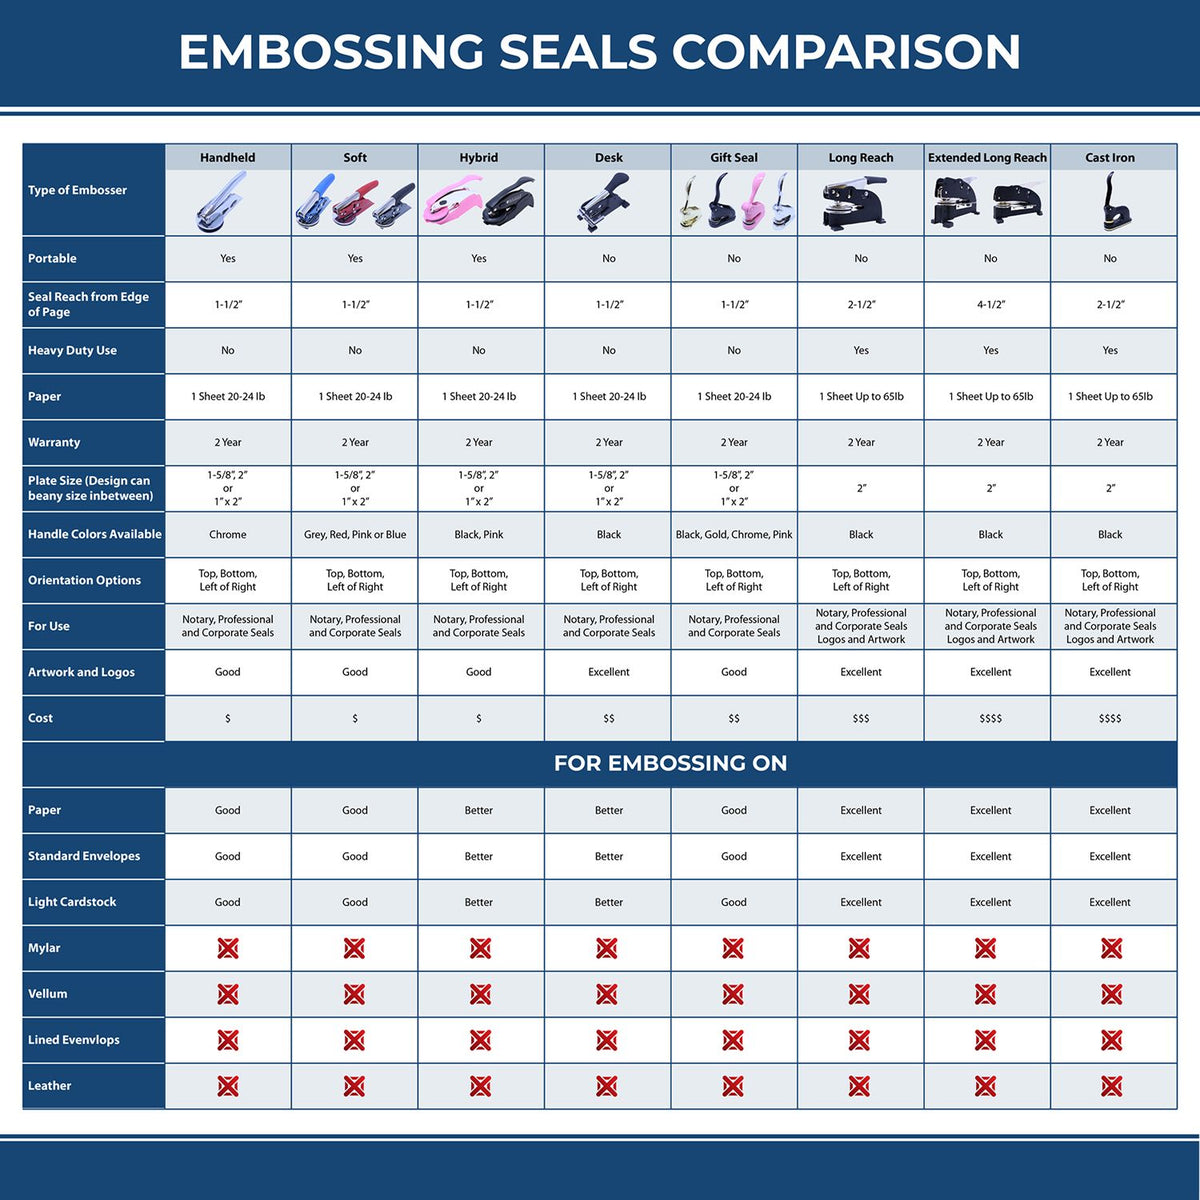 A comparison chart for the different types of mount models available for the State of South Carolina Extended Long Reach Engineer Seal.